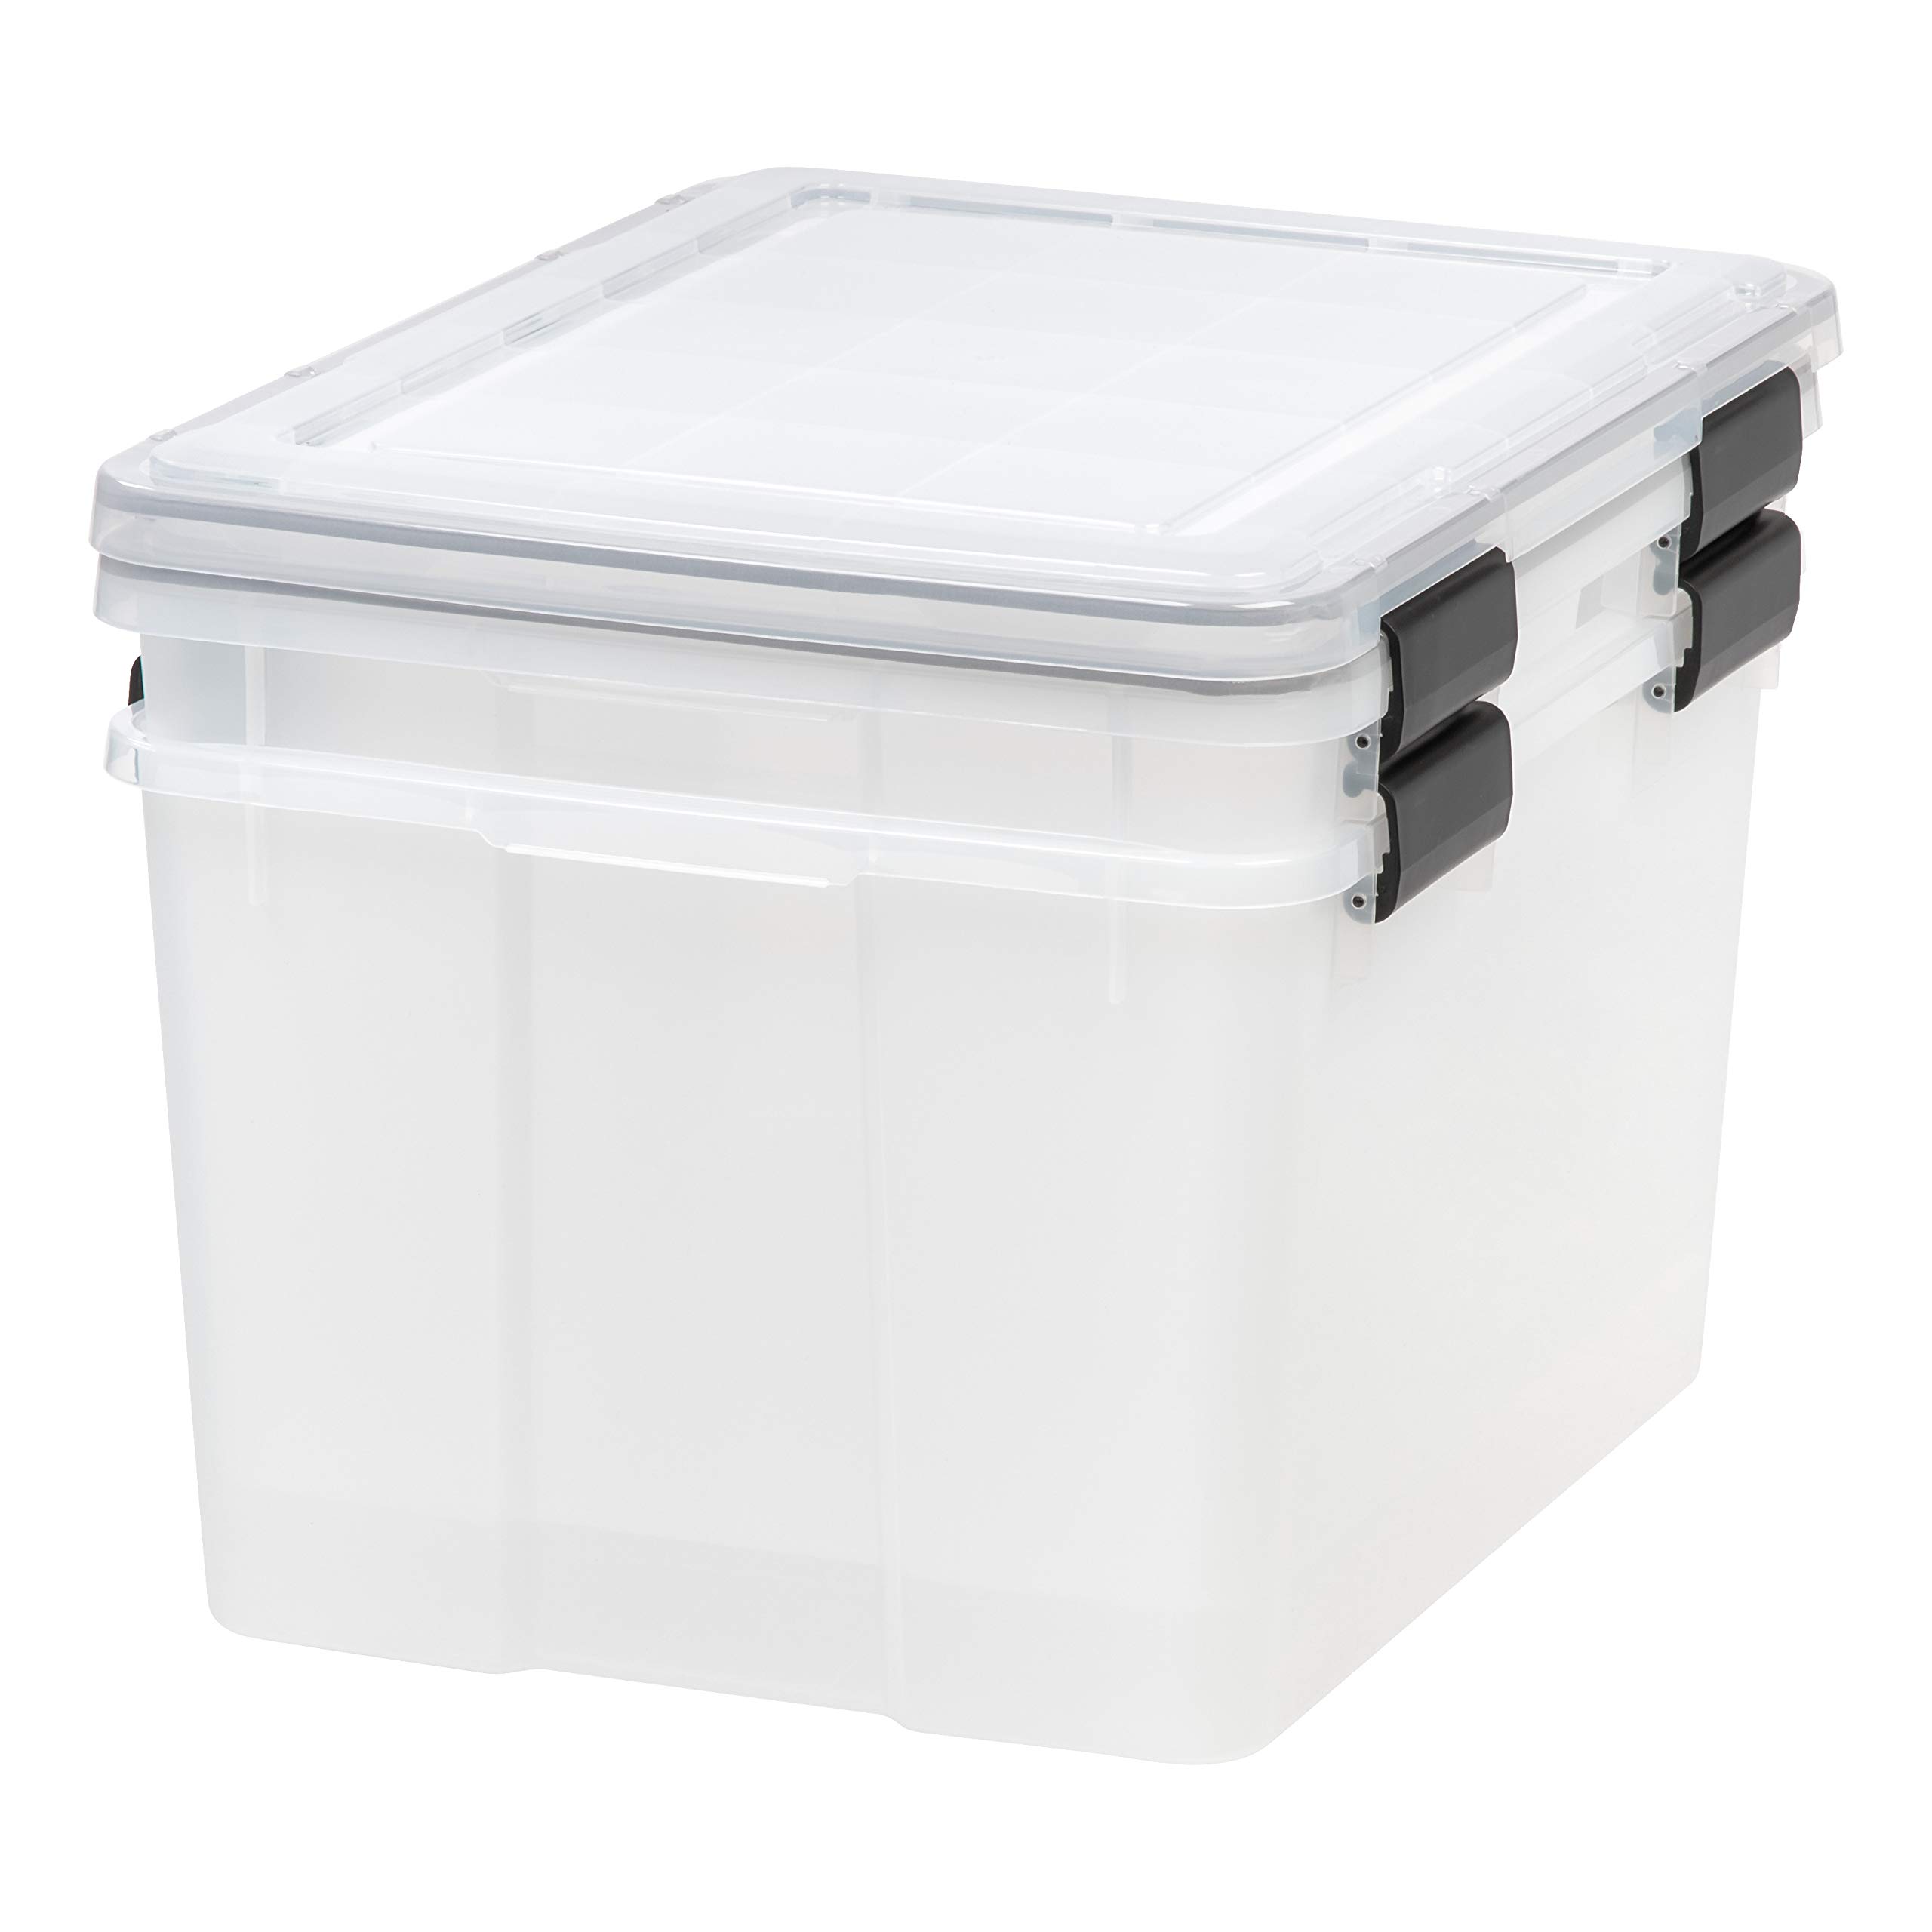 IRIS USA WEATHERPRO 47 Quart Stackable Storage Box with Airtight Gasket Seal Lid, Heavy Duty Containers with Tight Latches, Weather proof Bins for Closet Basement Attic, 2 Pack - Clear/Black